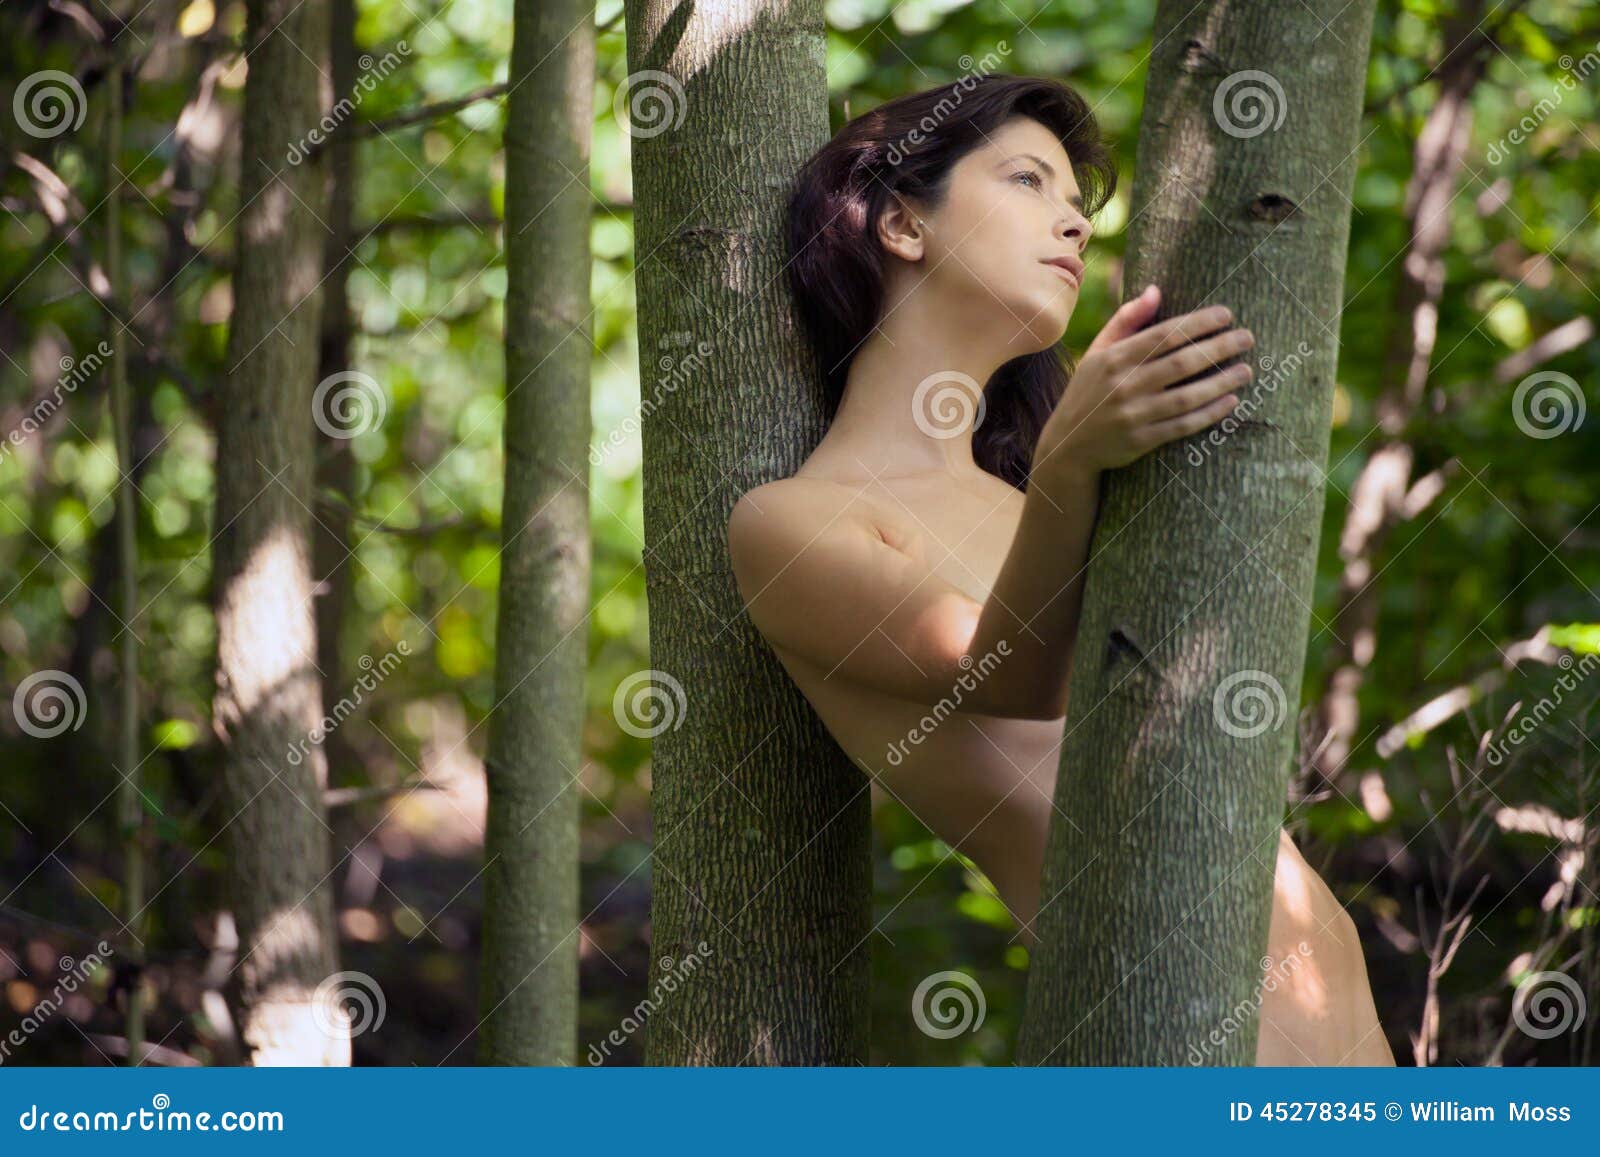 christian kober recommends nude woman in woods pic